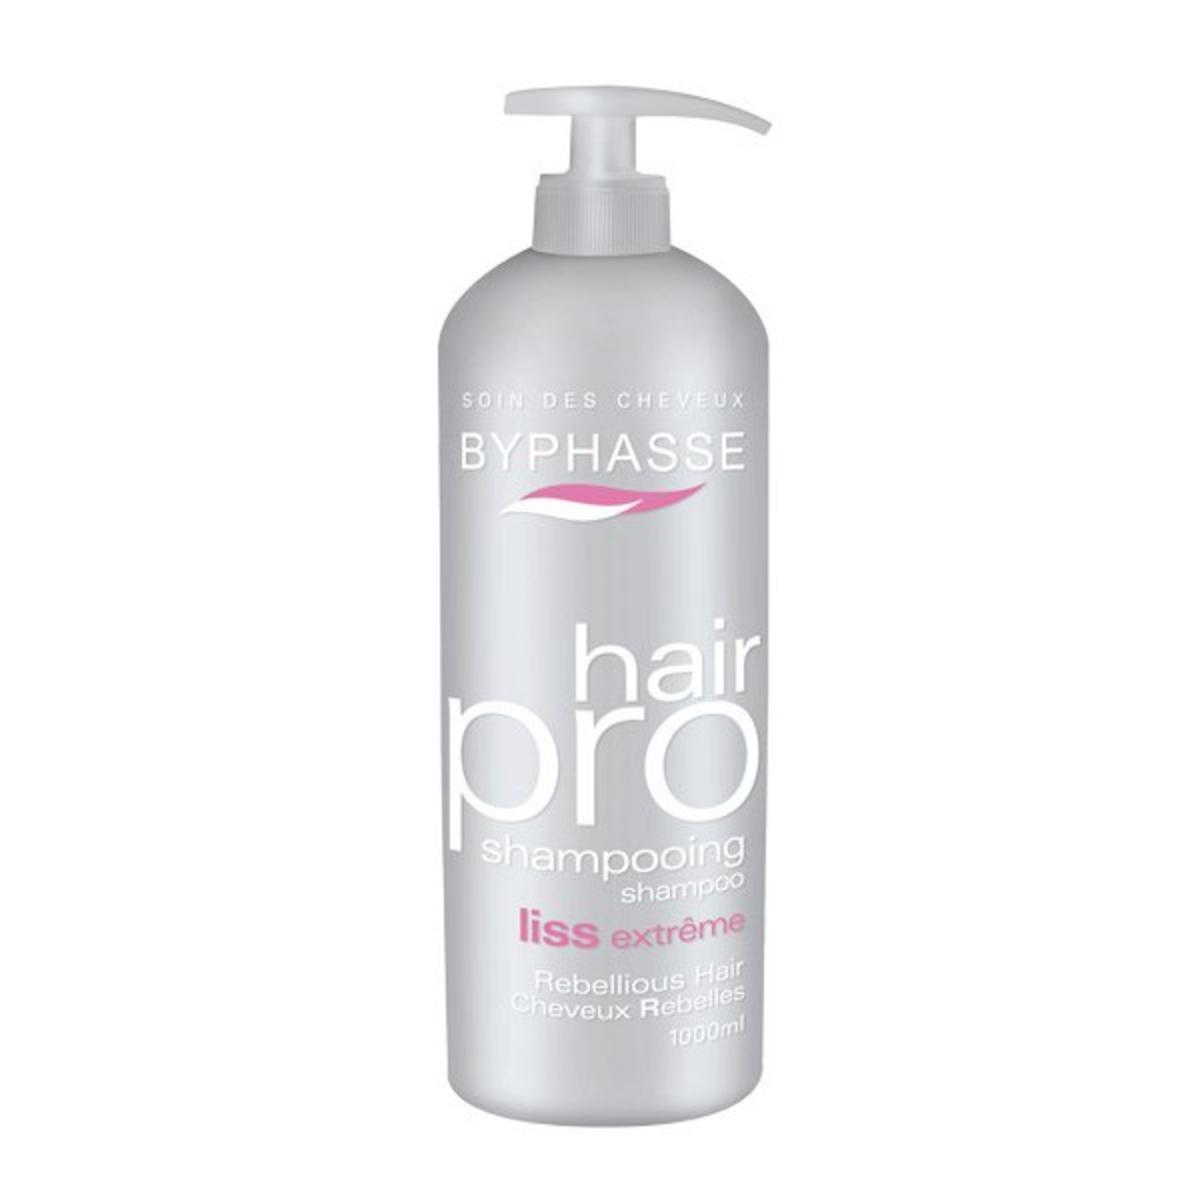 Shampooing hair pro liss extreme